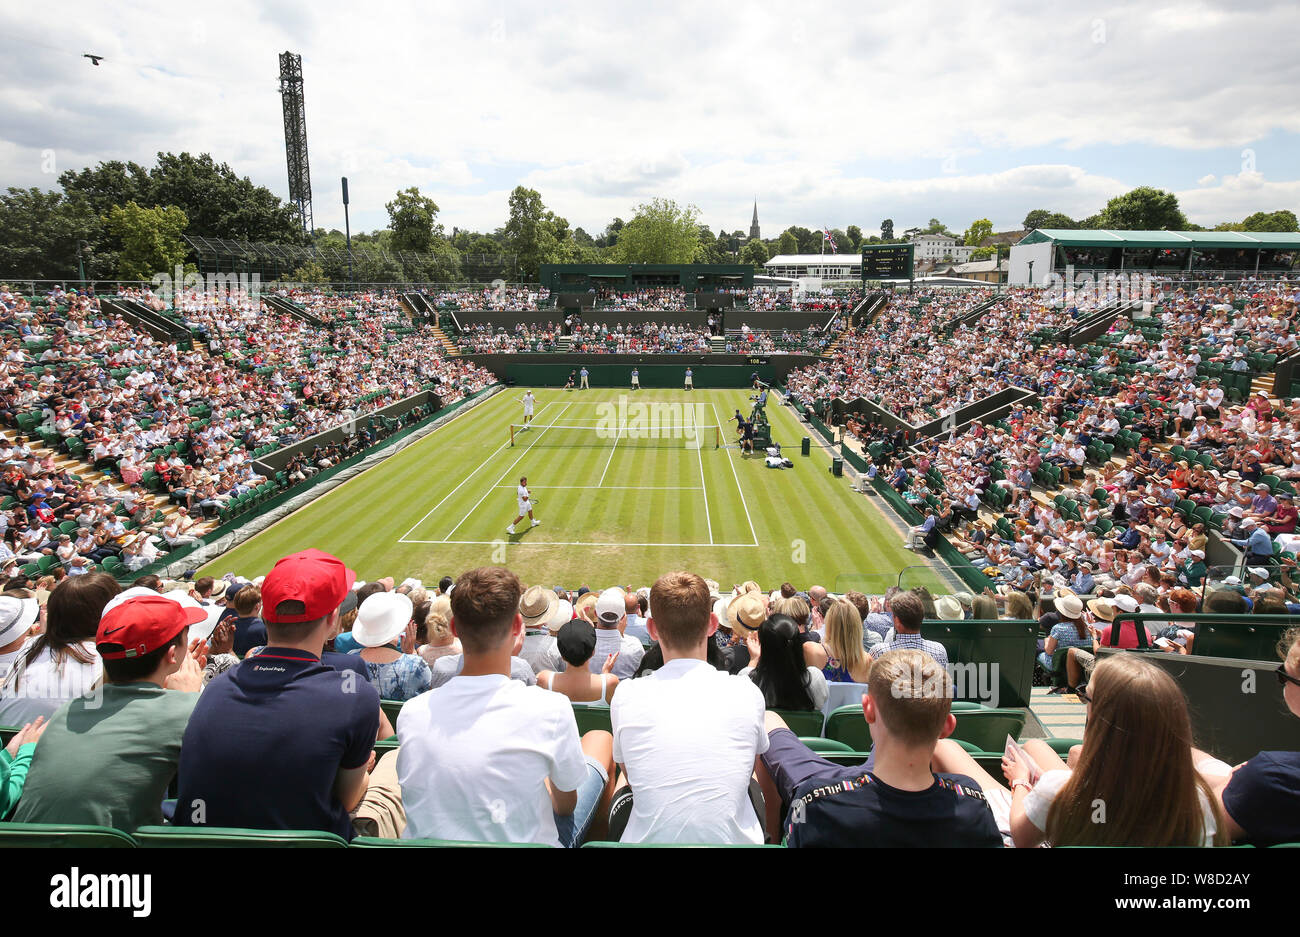 Over view of the stadium during the match between Stan Wawrinka vs Reilly Opelka in 2019 Wimbledon Championships, London, England, United Kingdom Stock Photo